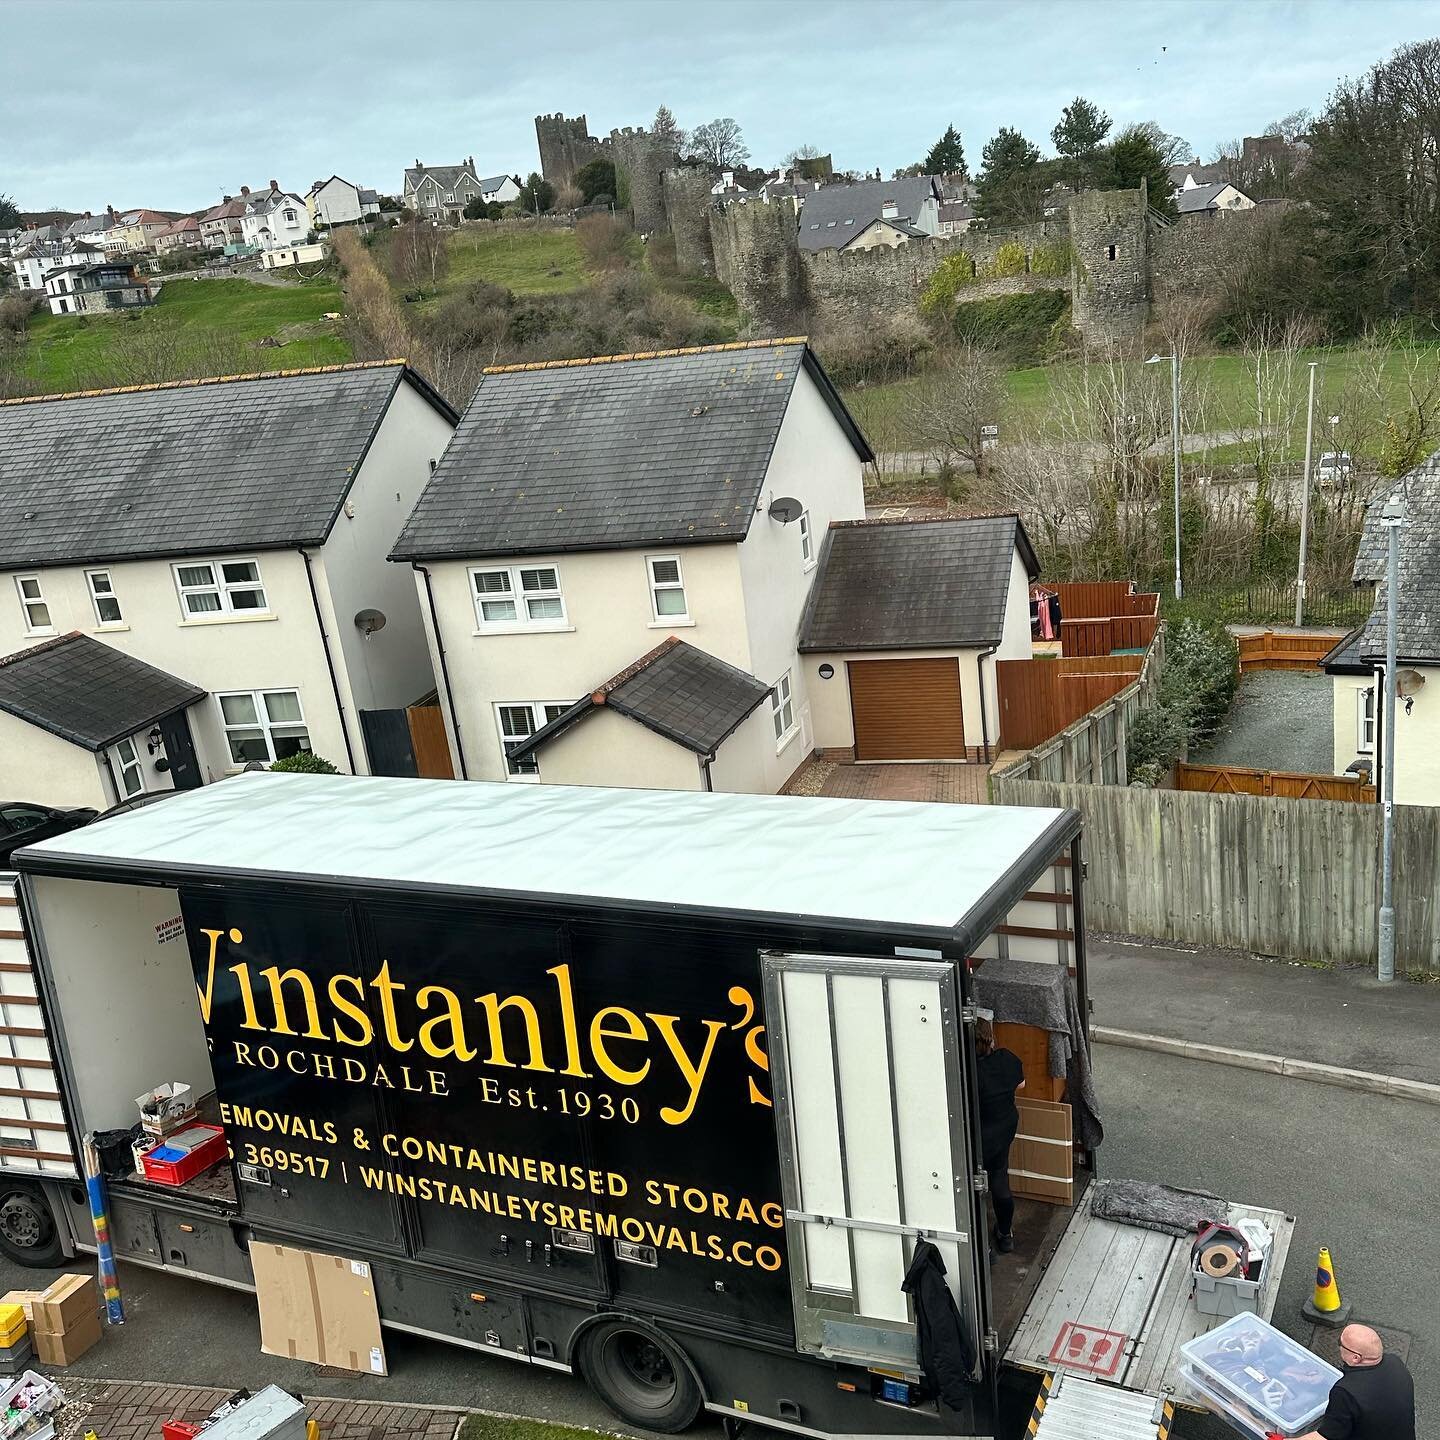 Lots of fun in the one way system of Conway castle.
🚛 🏰 

#winstanleysremovals 
#removals #removalservice #removalsandstorage #conwaycastle #conway #conwaywales #wales #castle